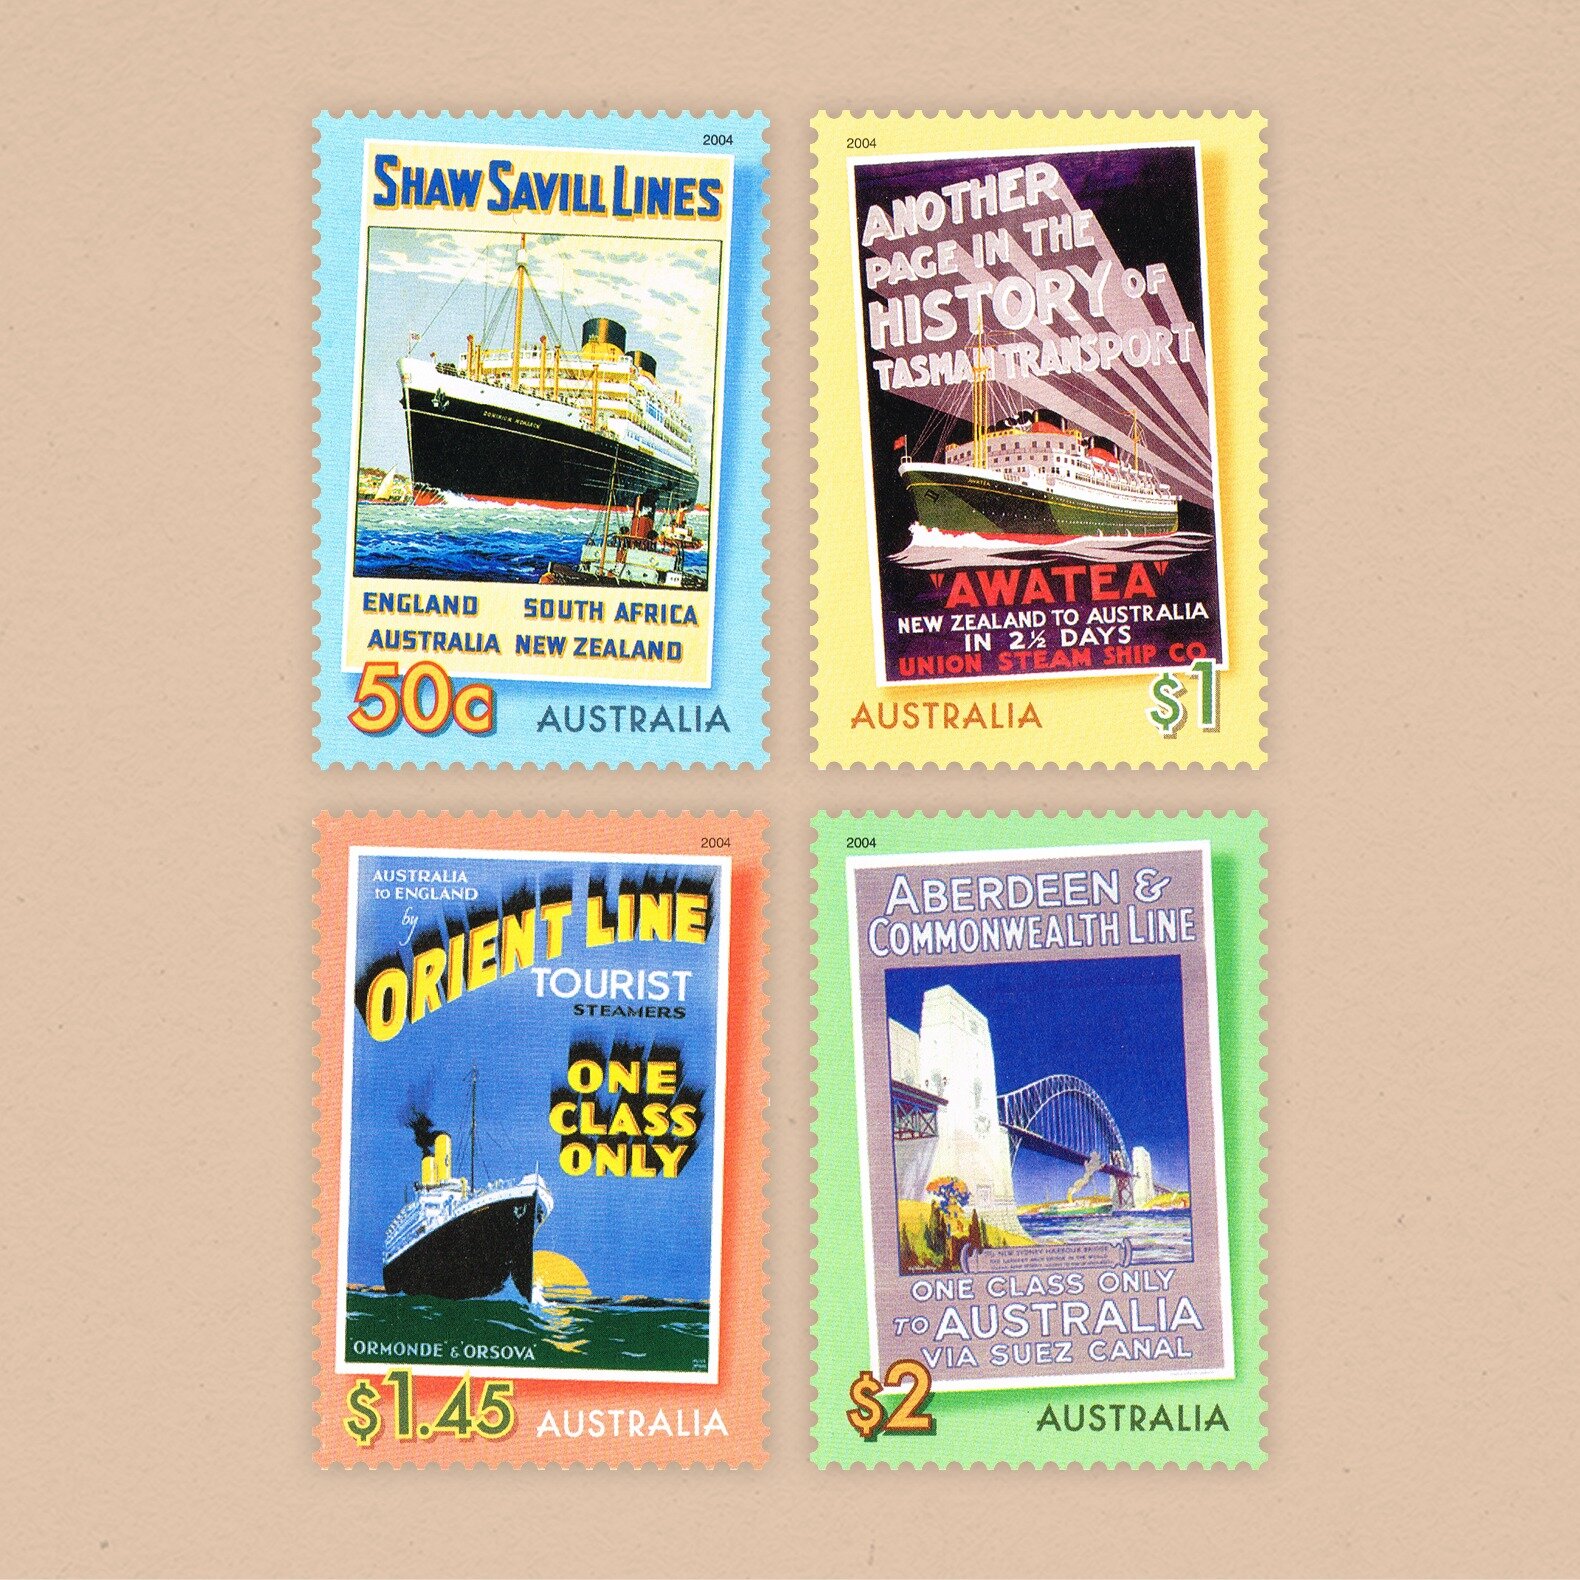 2004 Bon Voyage

The early half of the 20th century was the golden age of Maritime travel, and these stamps showcase the fabulous travel advertisements produced at the time. They evoke a new world of elegant travel, romance, and excitement aboard a f